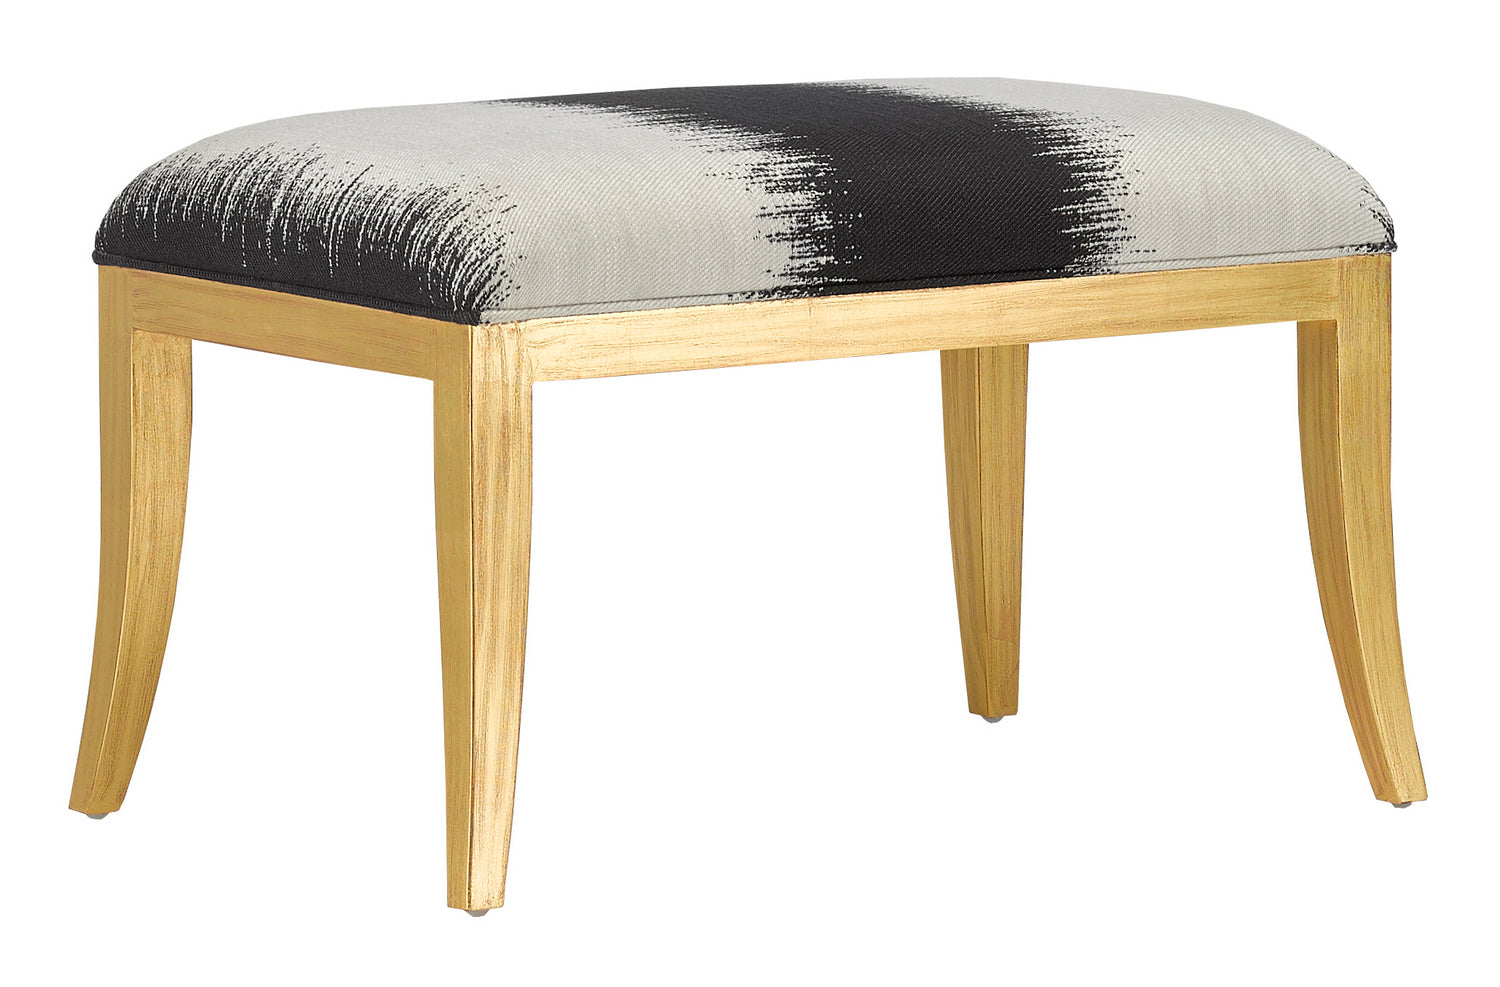 Ottoman from the Garson collection in Antique Gold finish